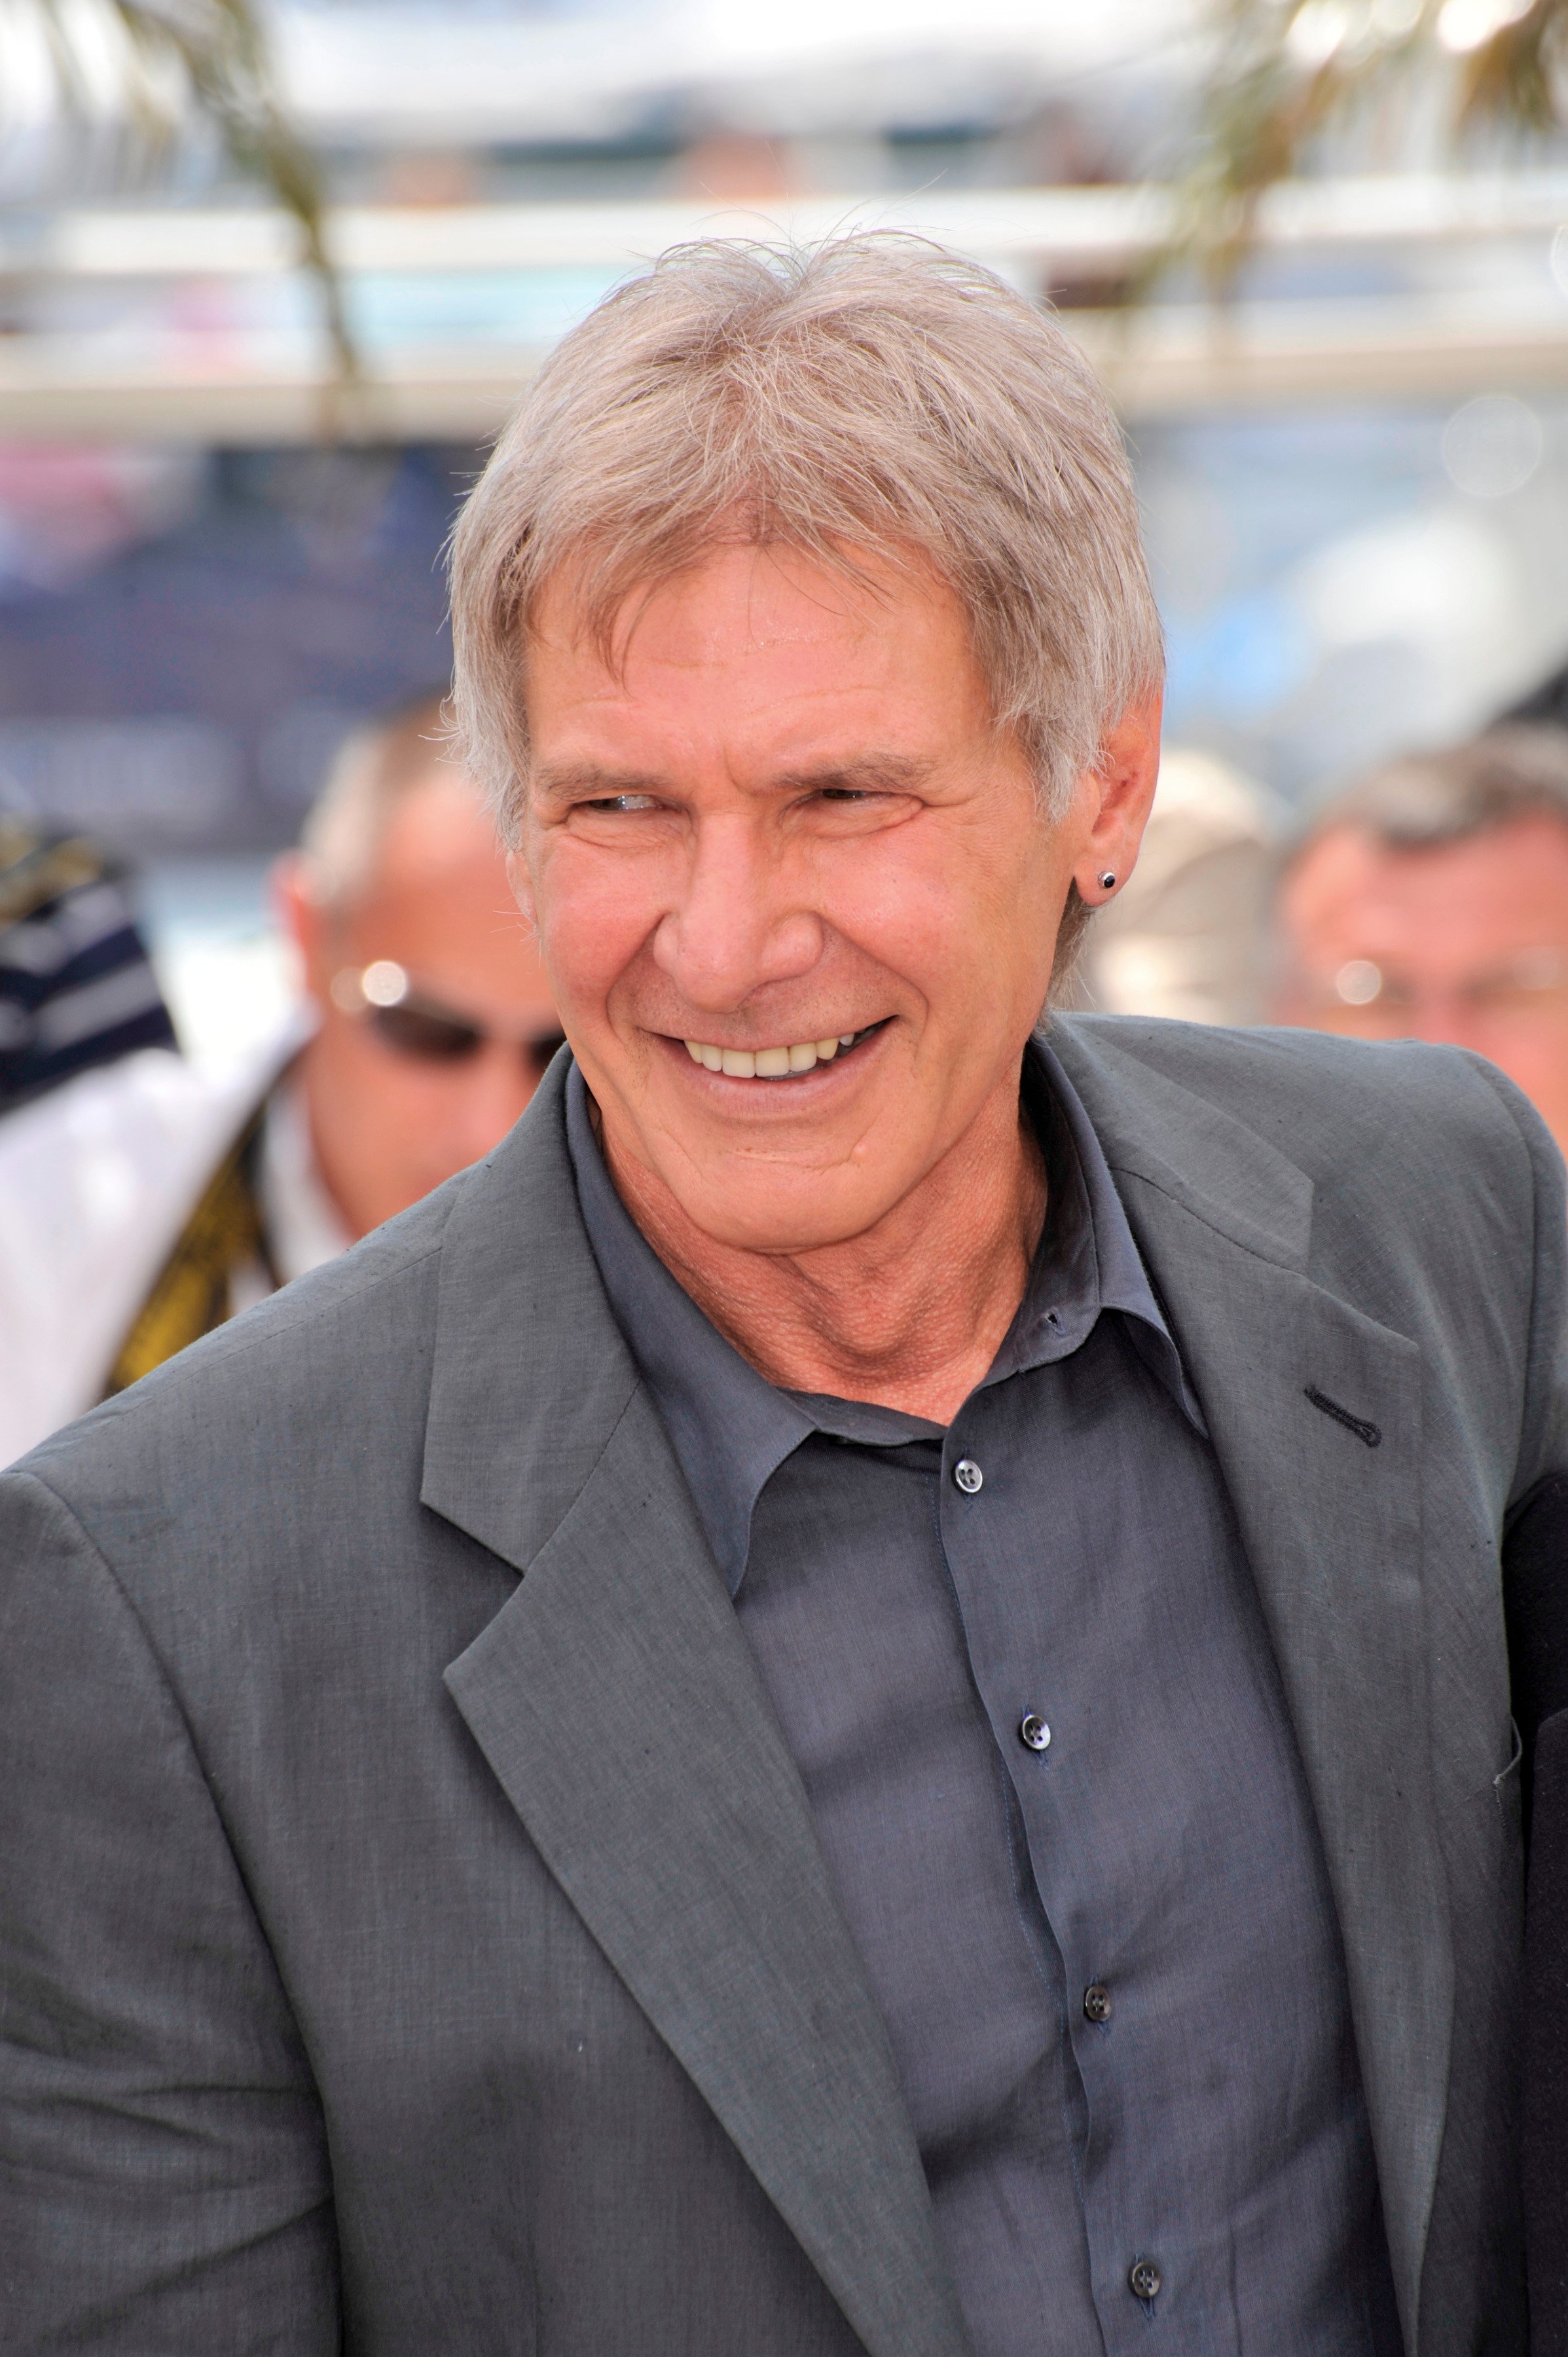 Harrison Ford at photocall for "Indiana Jones and the Kingdom of the Crystal Skull" at the 61st Annual Cannes Film Festival on May 18, 2008 Cannes, France | Photo: Shutterstock